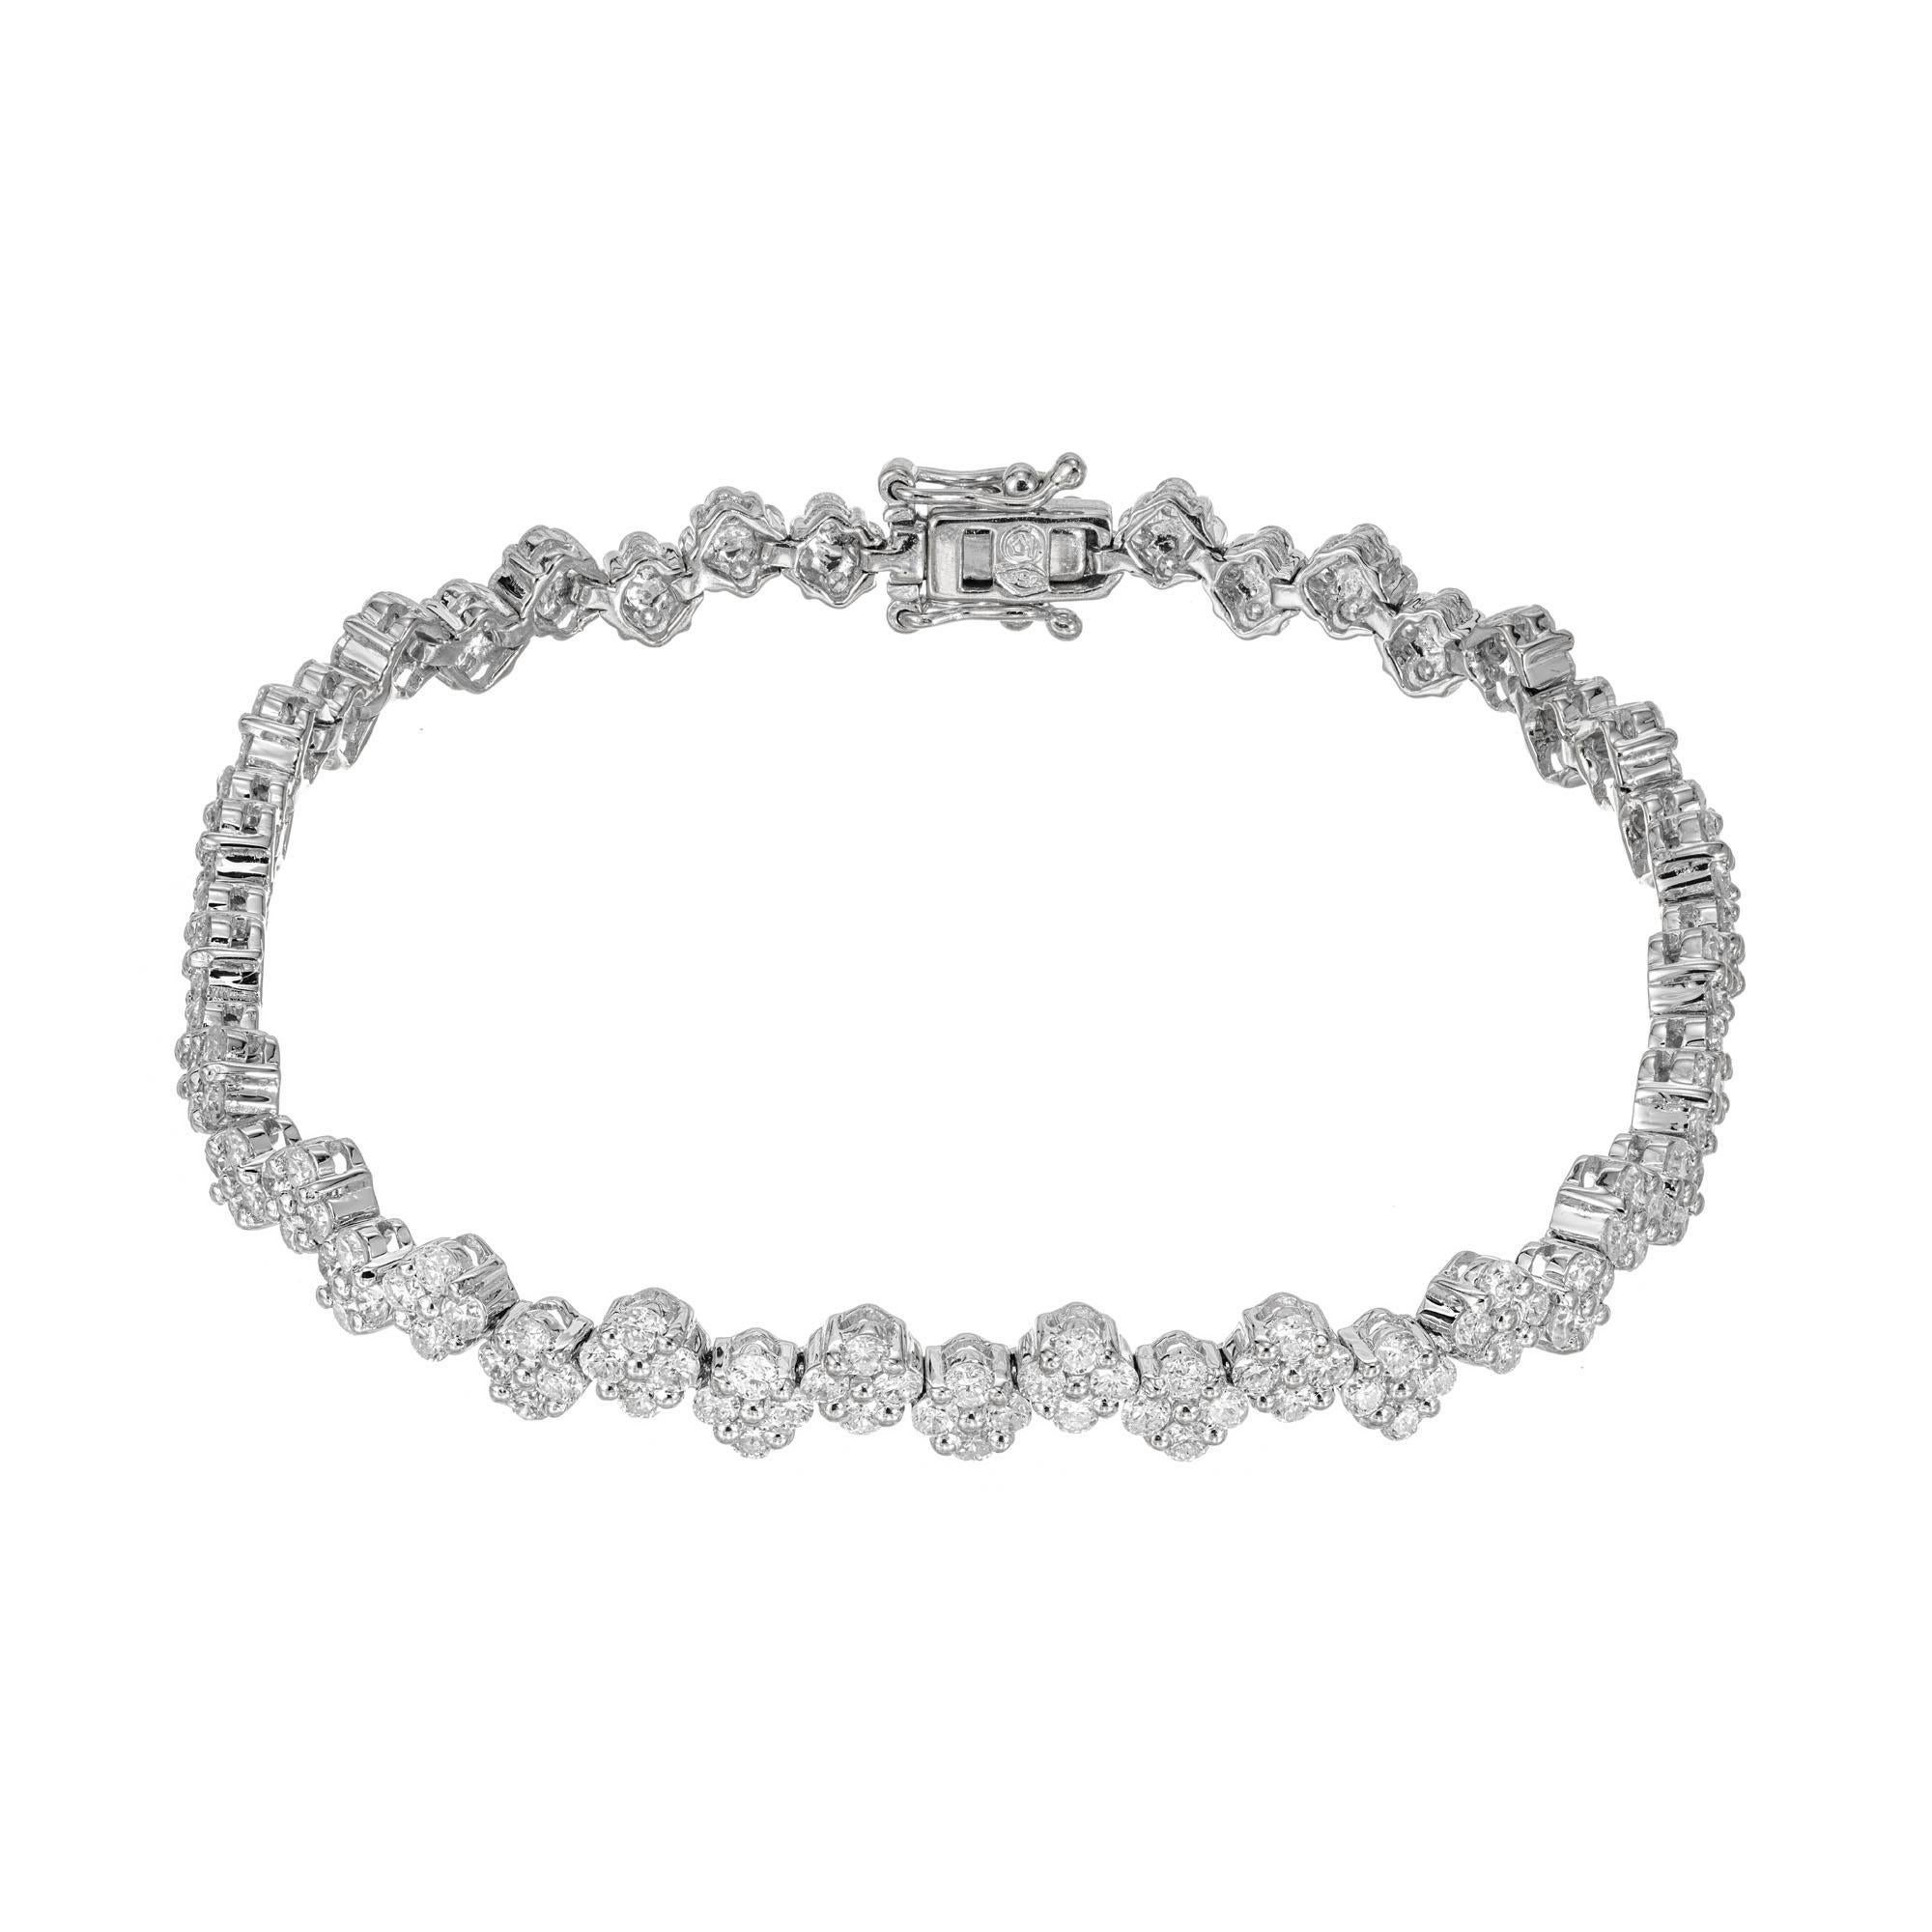 Diamond tennis bracelet. 184 round brilliant diamonds set in 18k white gold. 6.5 inches in length.  

184 round brilliant cut diamonds, G SI-I approx. 2.76cts
18k white gold 
Stamped: 750
10.4 grams
Bracelet: 6.5 Inches
Width: 5.2mm